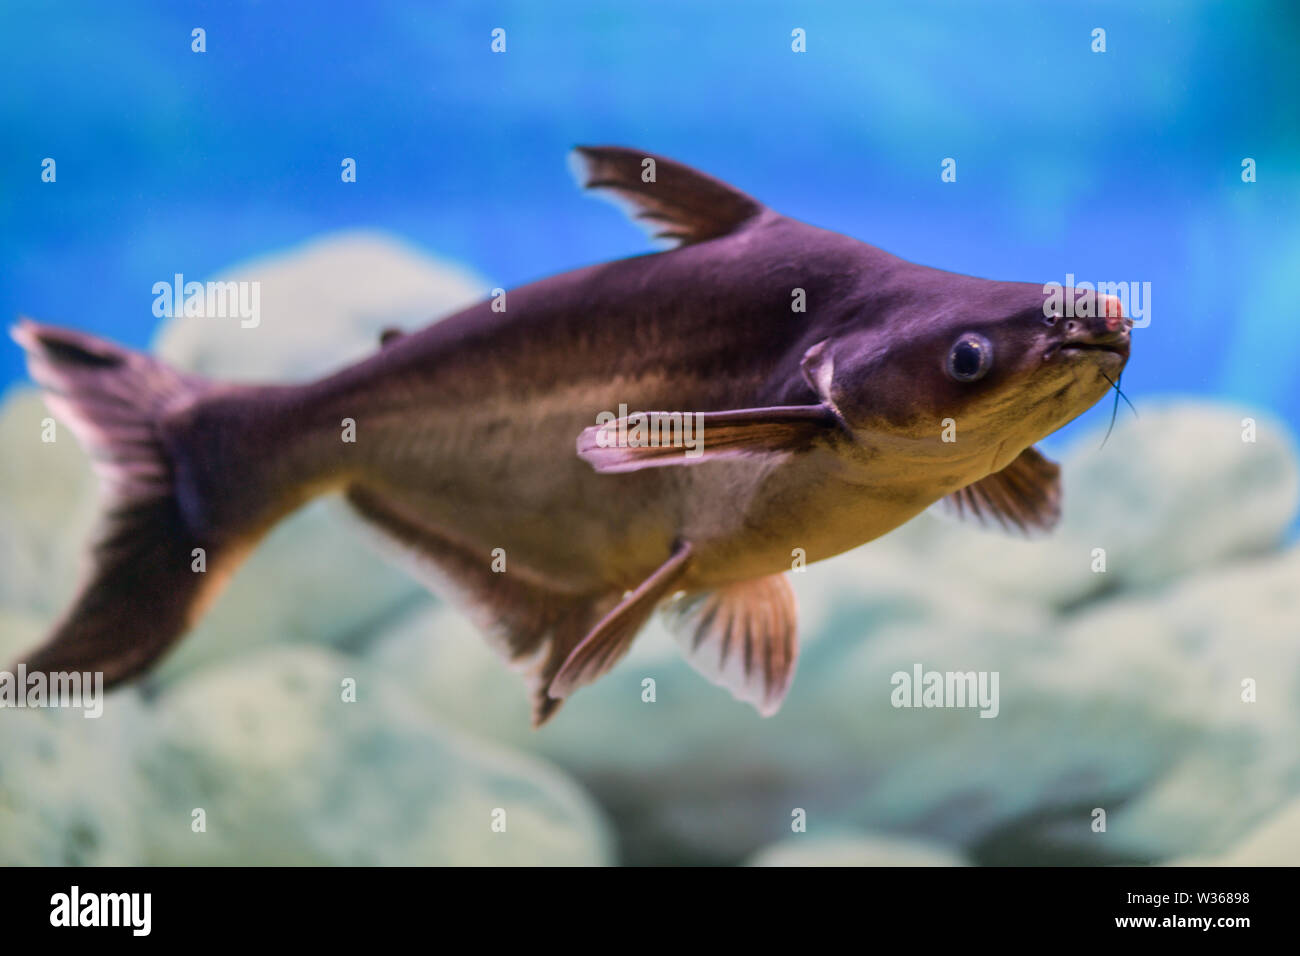 Pangasianodon hypophthalmus. Pangasius fish swims in a transparent aquarium on a blue and white background with a wound on the nose Stock Photo